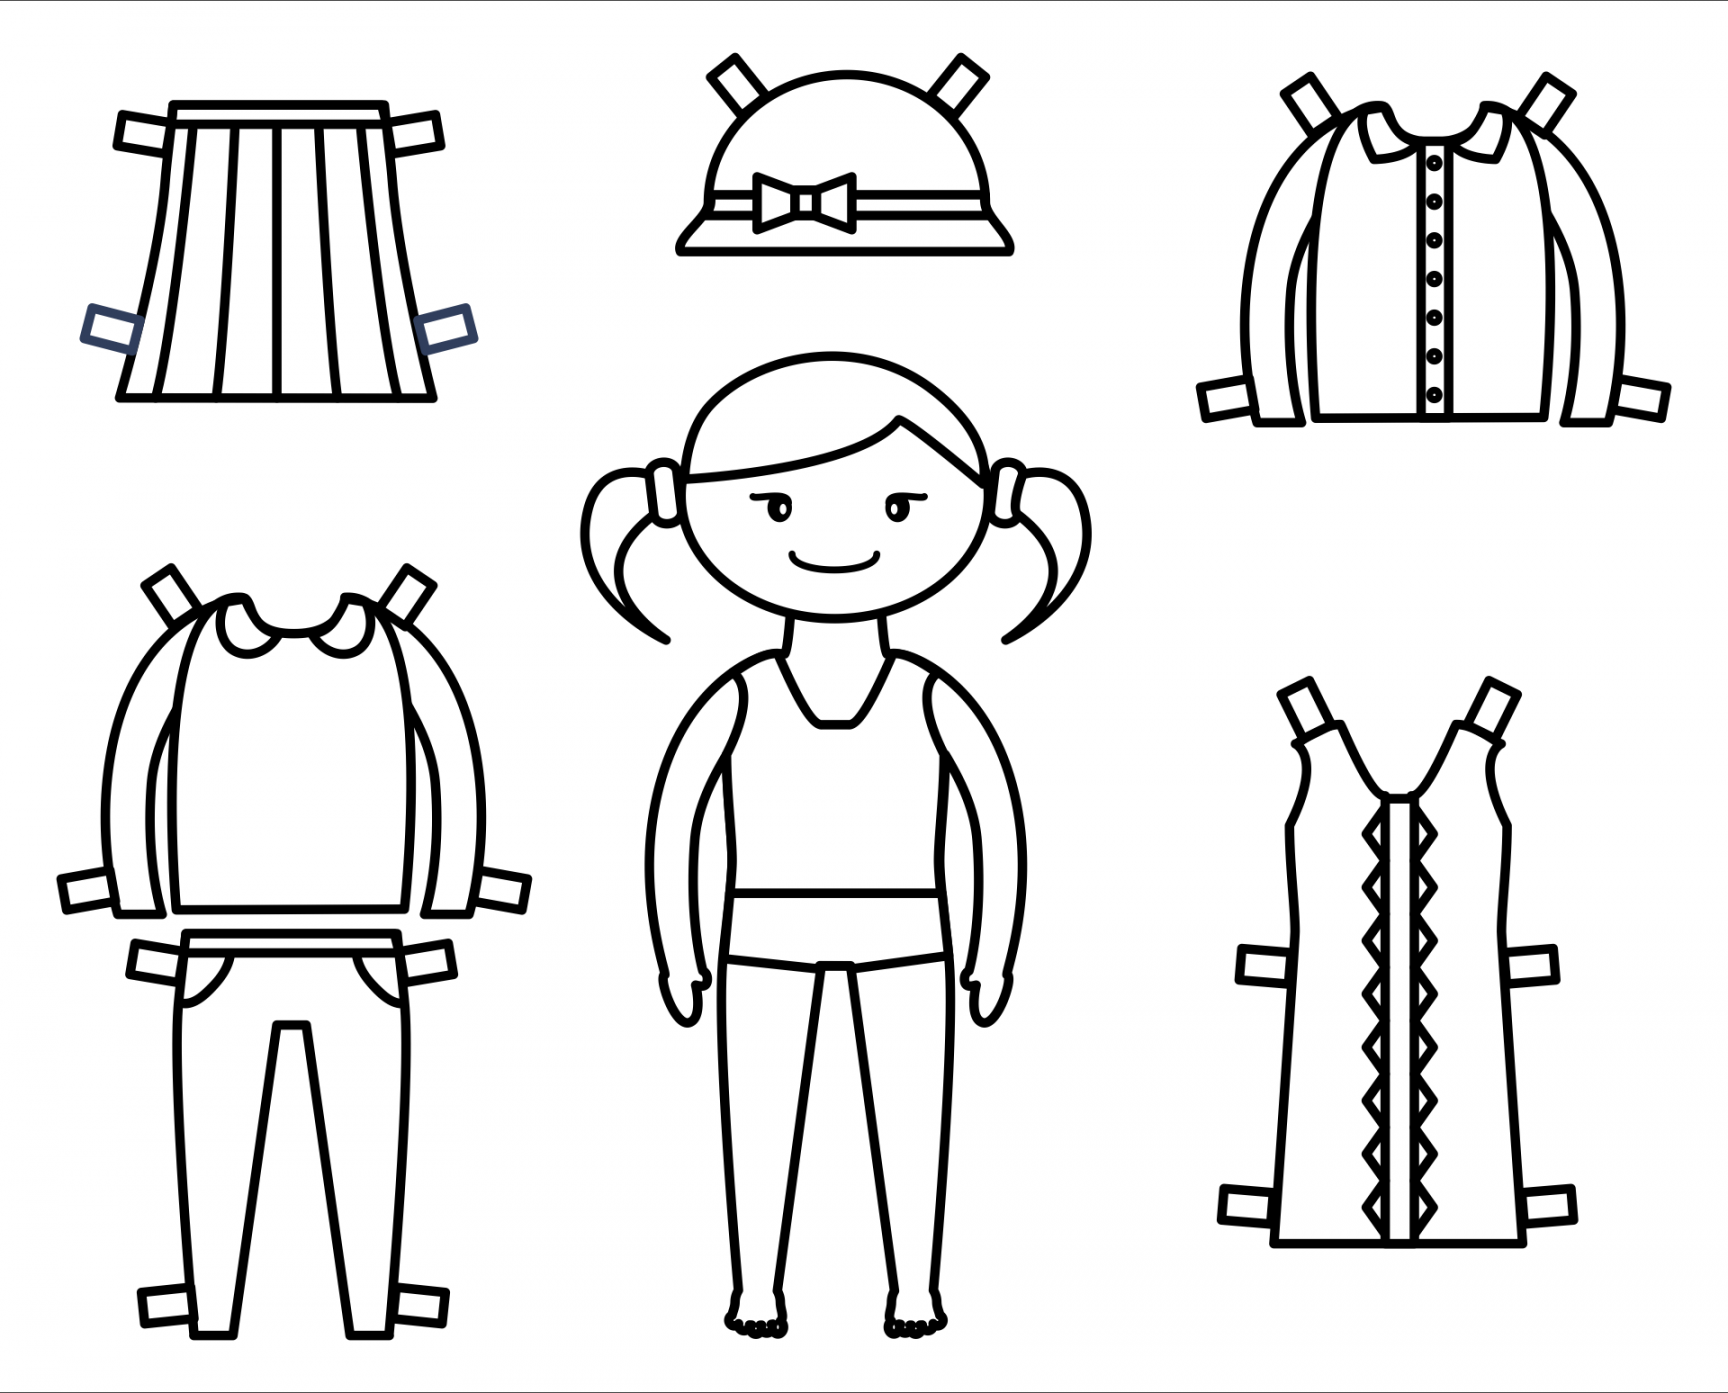 Best Printable Paper Dolls To Color - printablee - Free Printable Cut Out Paper Dolls